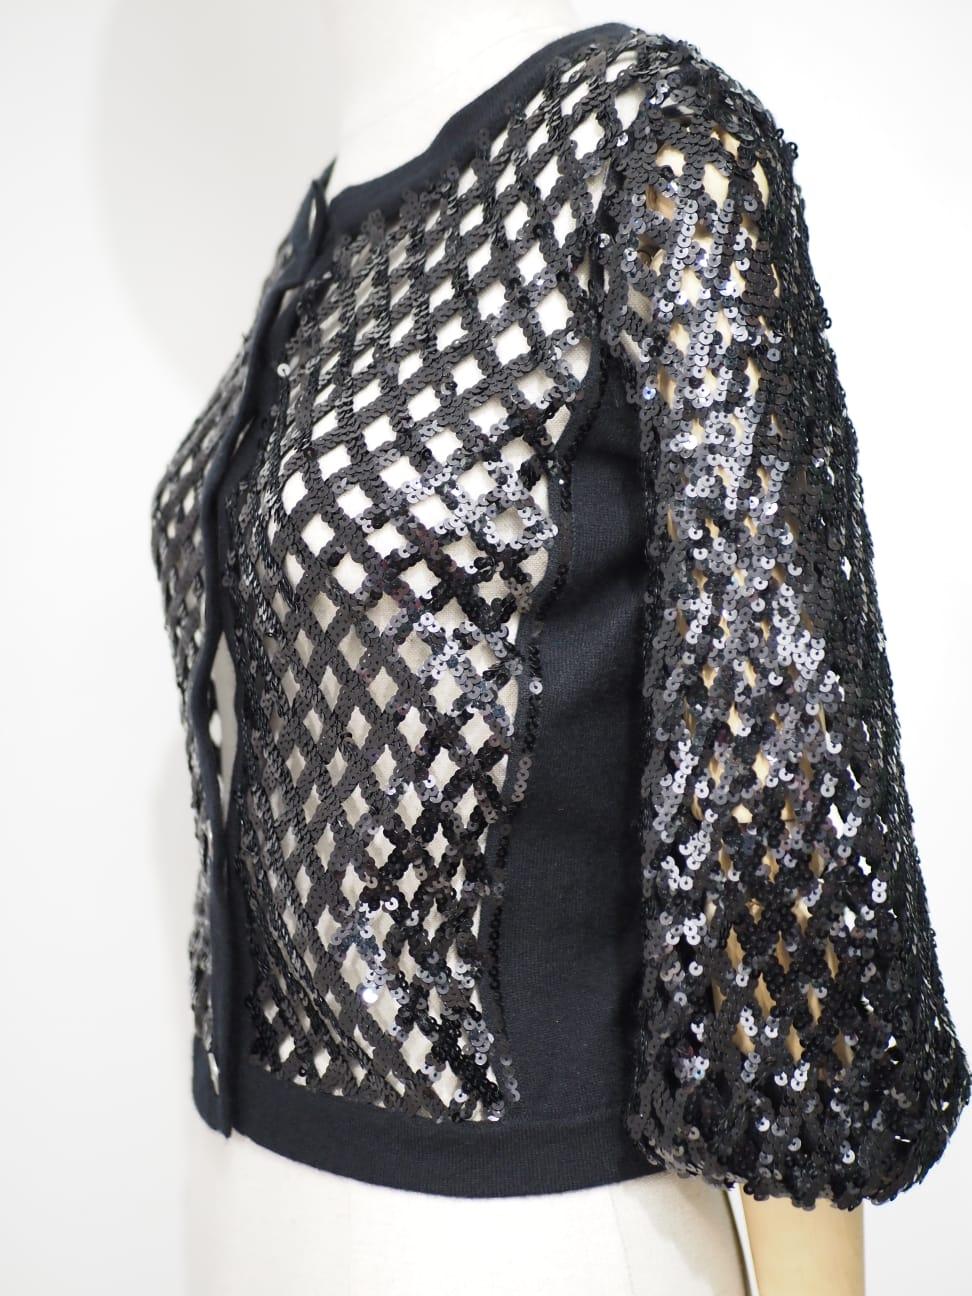 Chanel black cachemire and sequins cardigan
Totally made in Italy in size 36